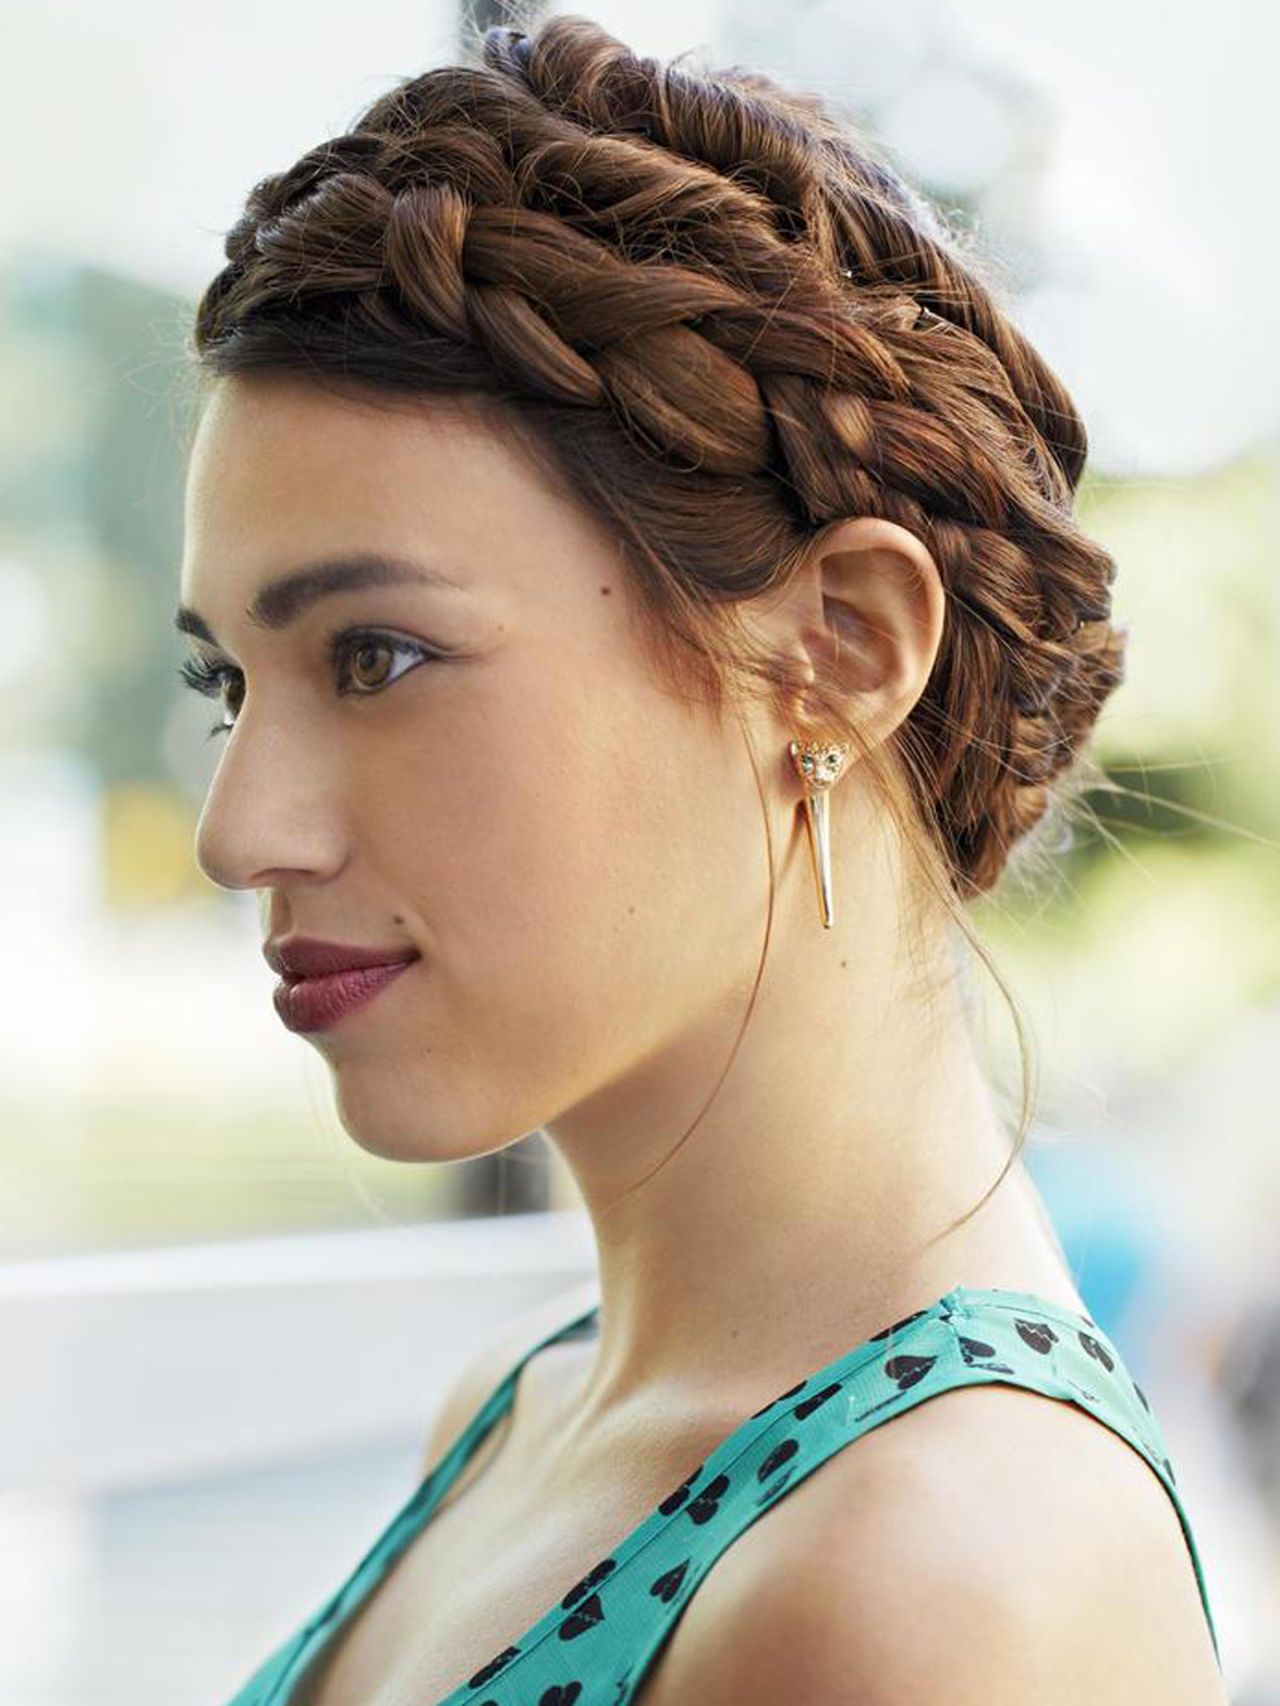 26 Pretty And Easy Braided Hairstyles For Girls To Try | MomJunction